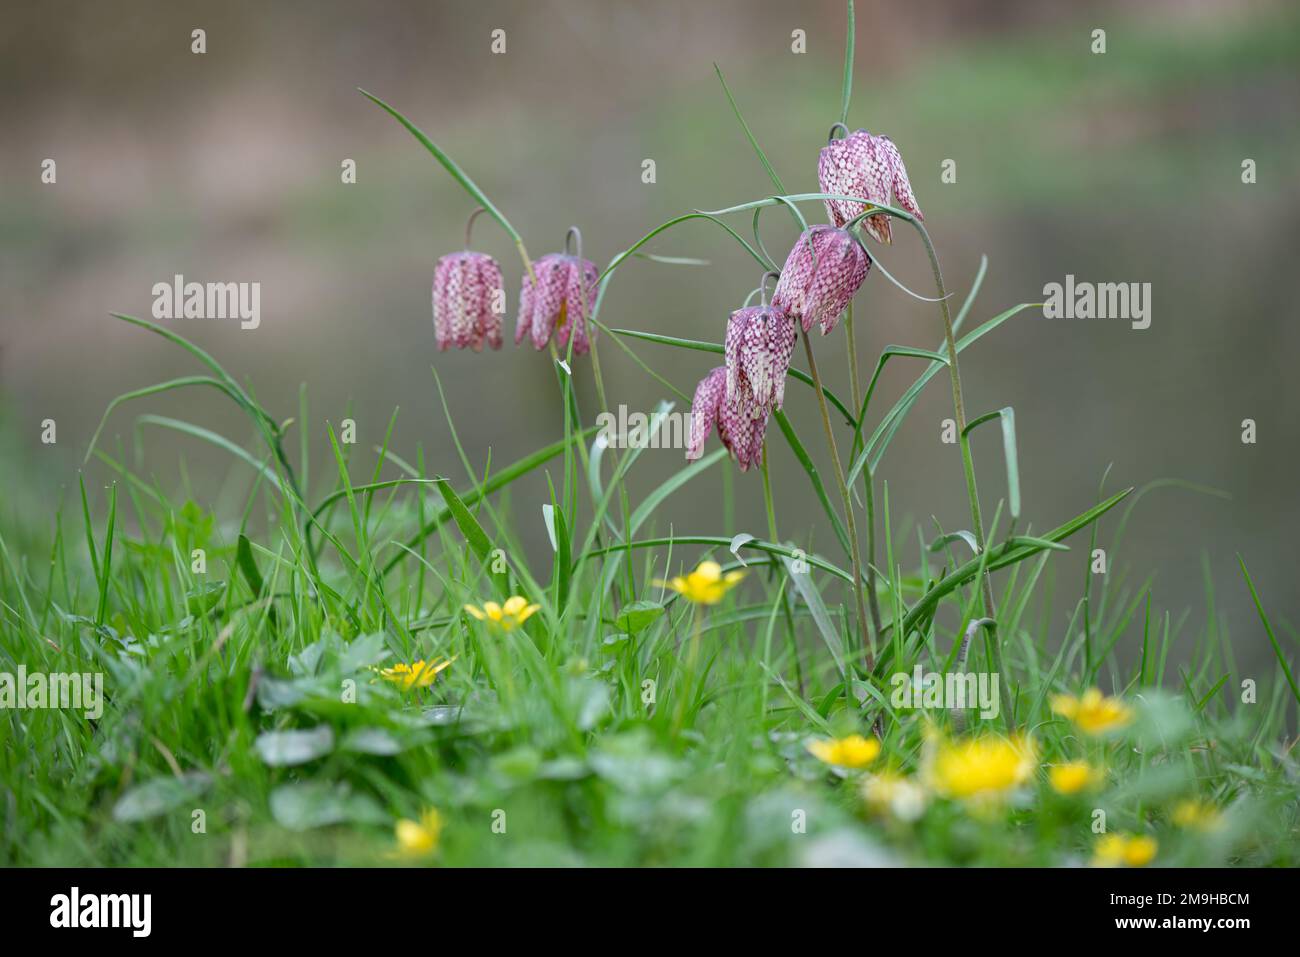 Fritillaria meleagris Snake's head fritillary Spring wildflowers growing on riverbank in green grass with yellow flowers. France, Stock Photo